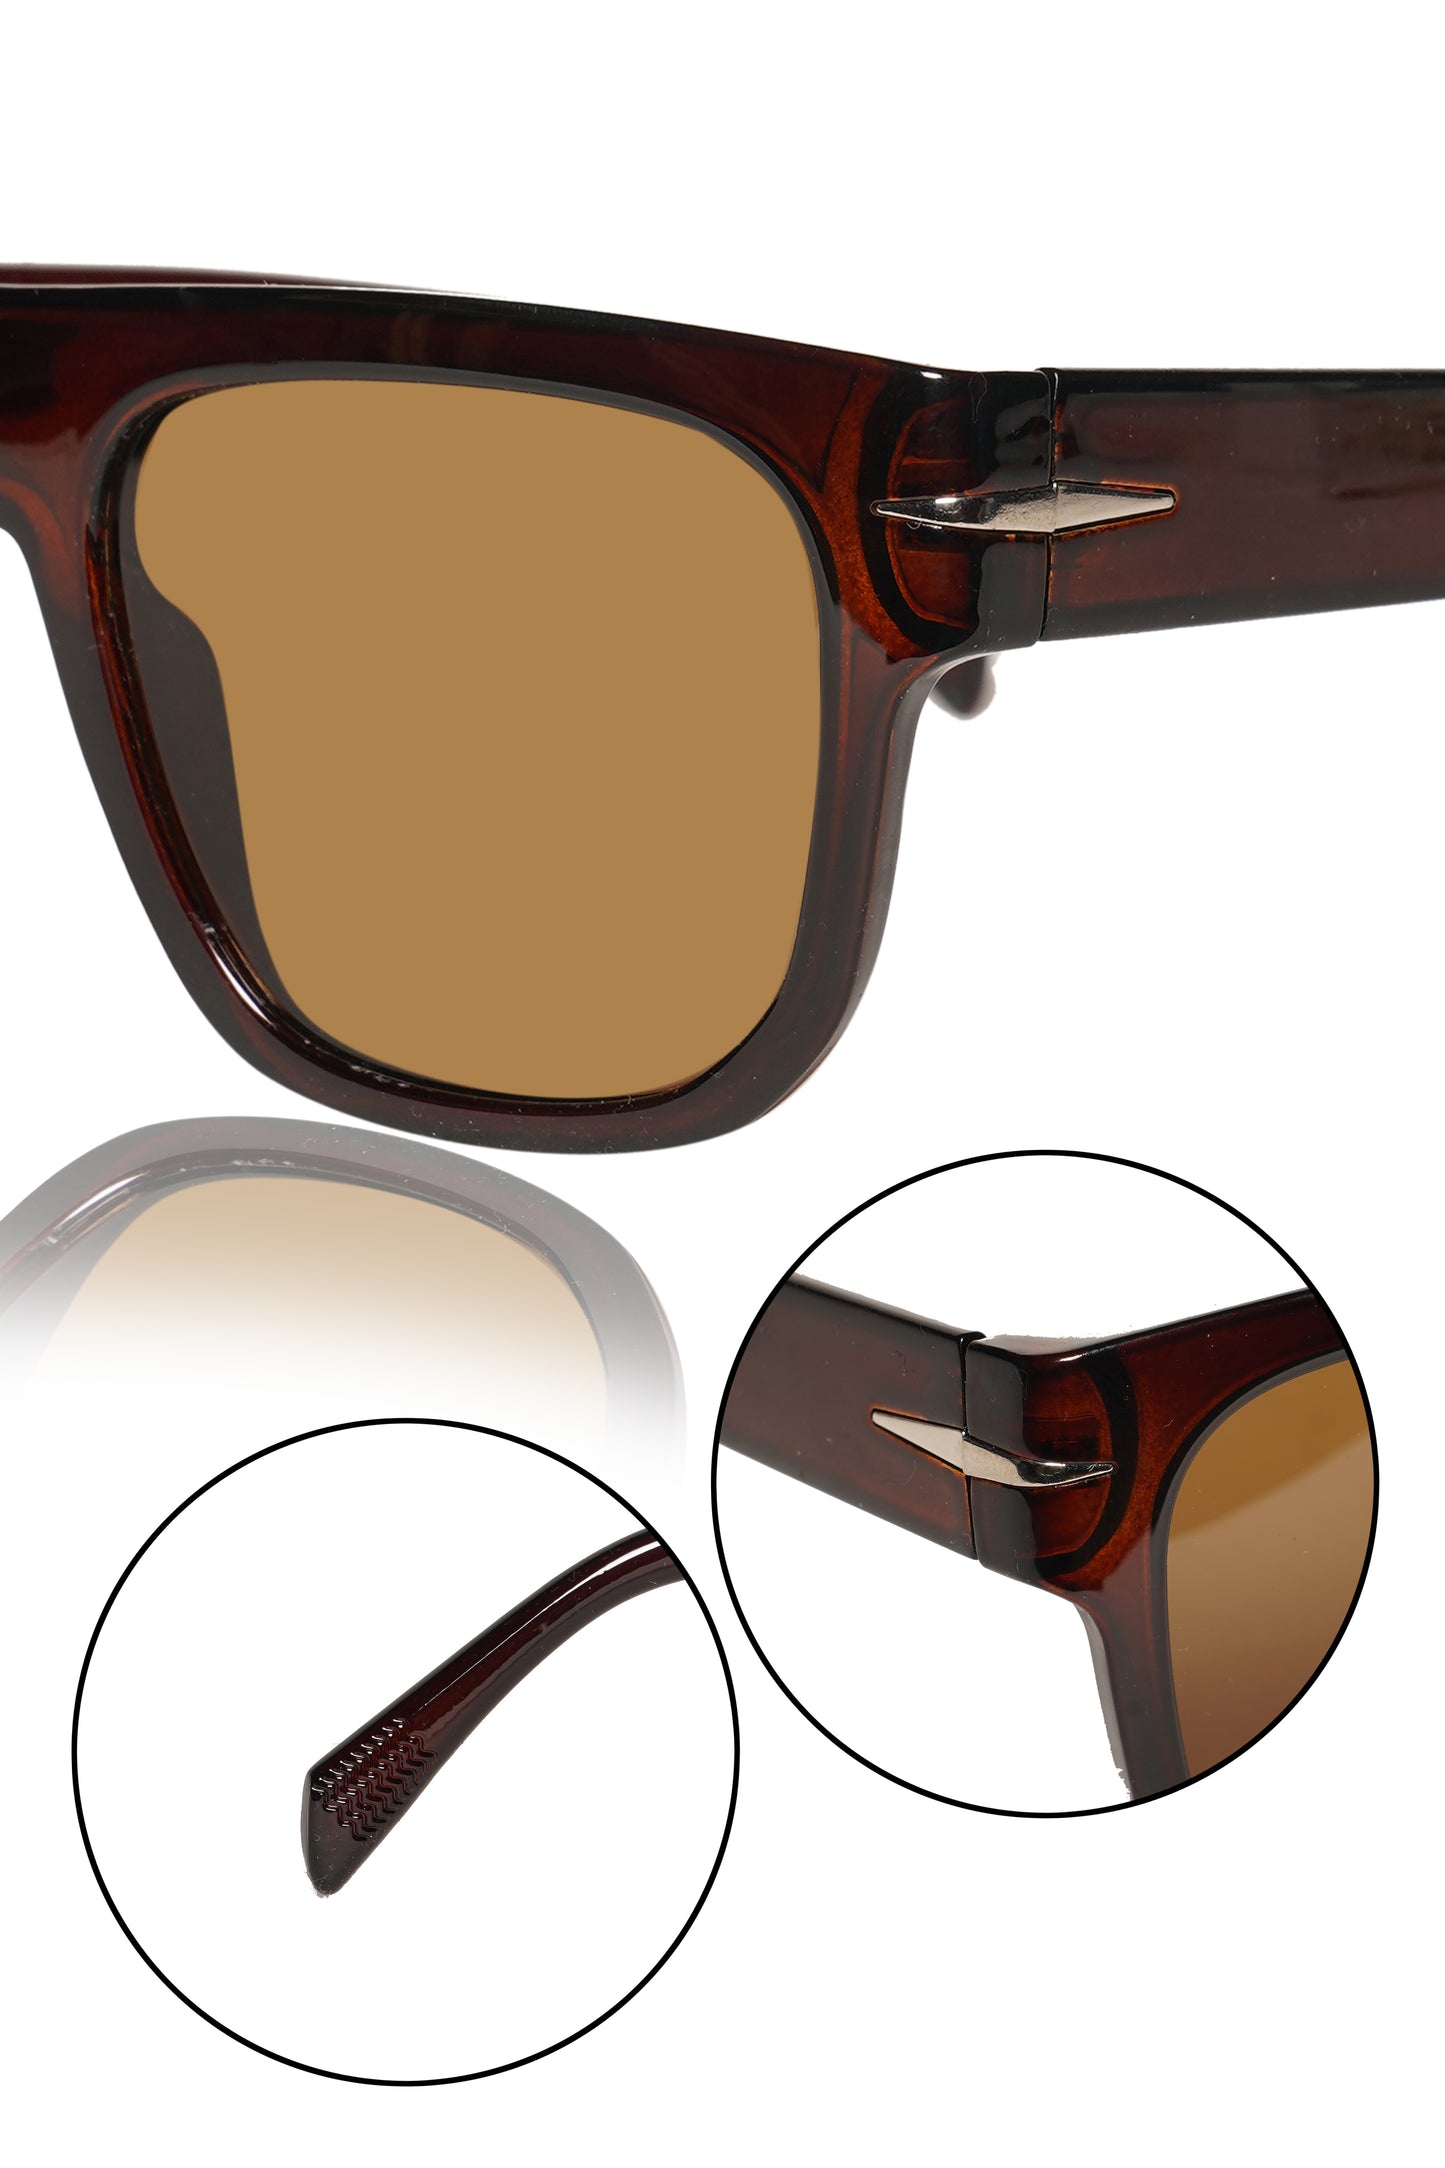 Jodykoes® Series Obsession : Premium Square Pure Acetate Sheet Designer Fashionable Sunglasses Eyewear Shades For Men and Women With UV Protection Eyeglasses Frame (Brown)